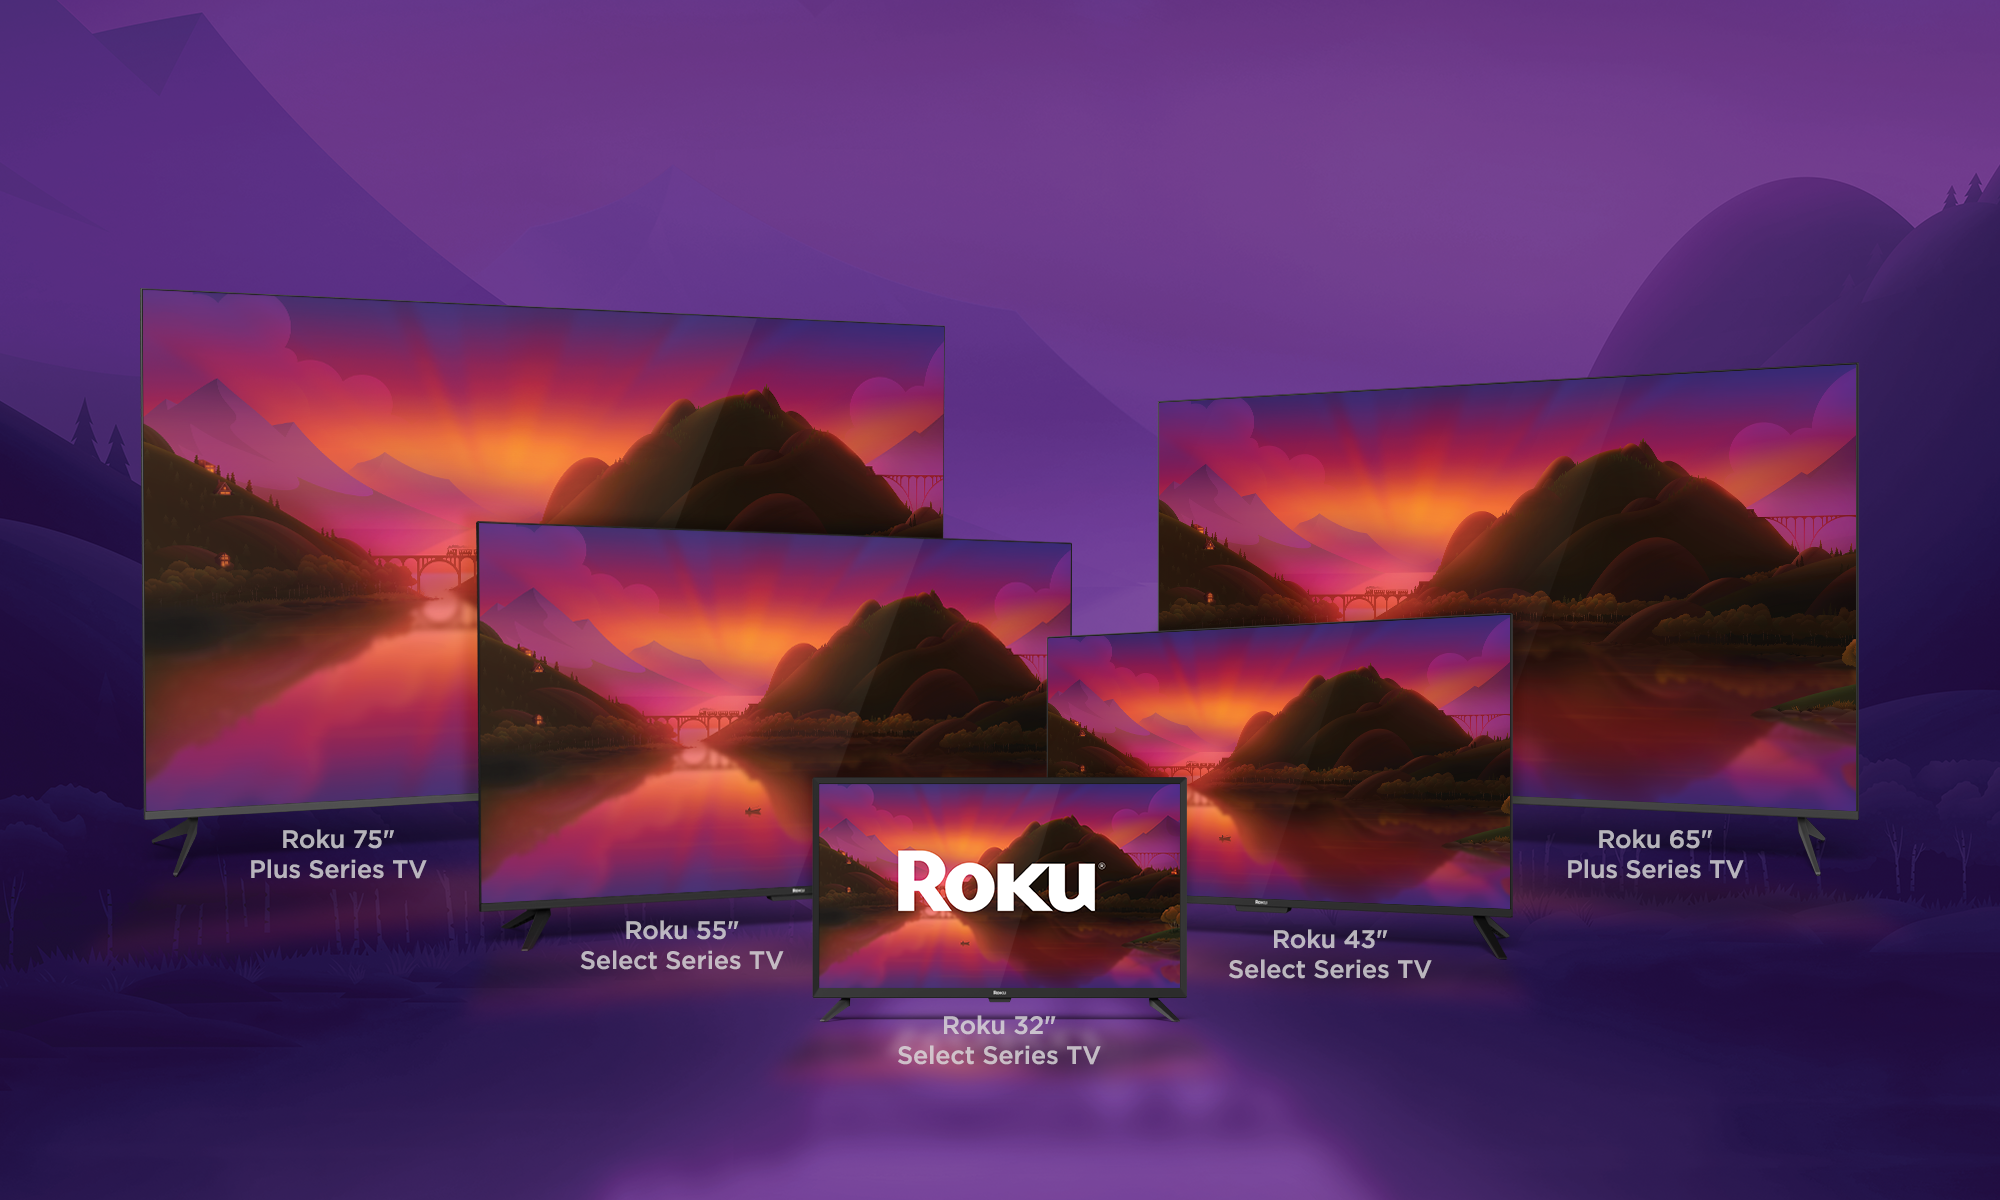 The all-new Roku TV was unveiled at CES 2023